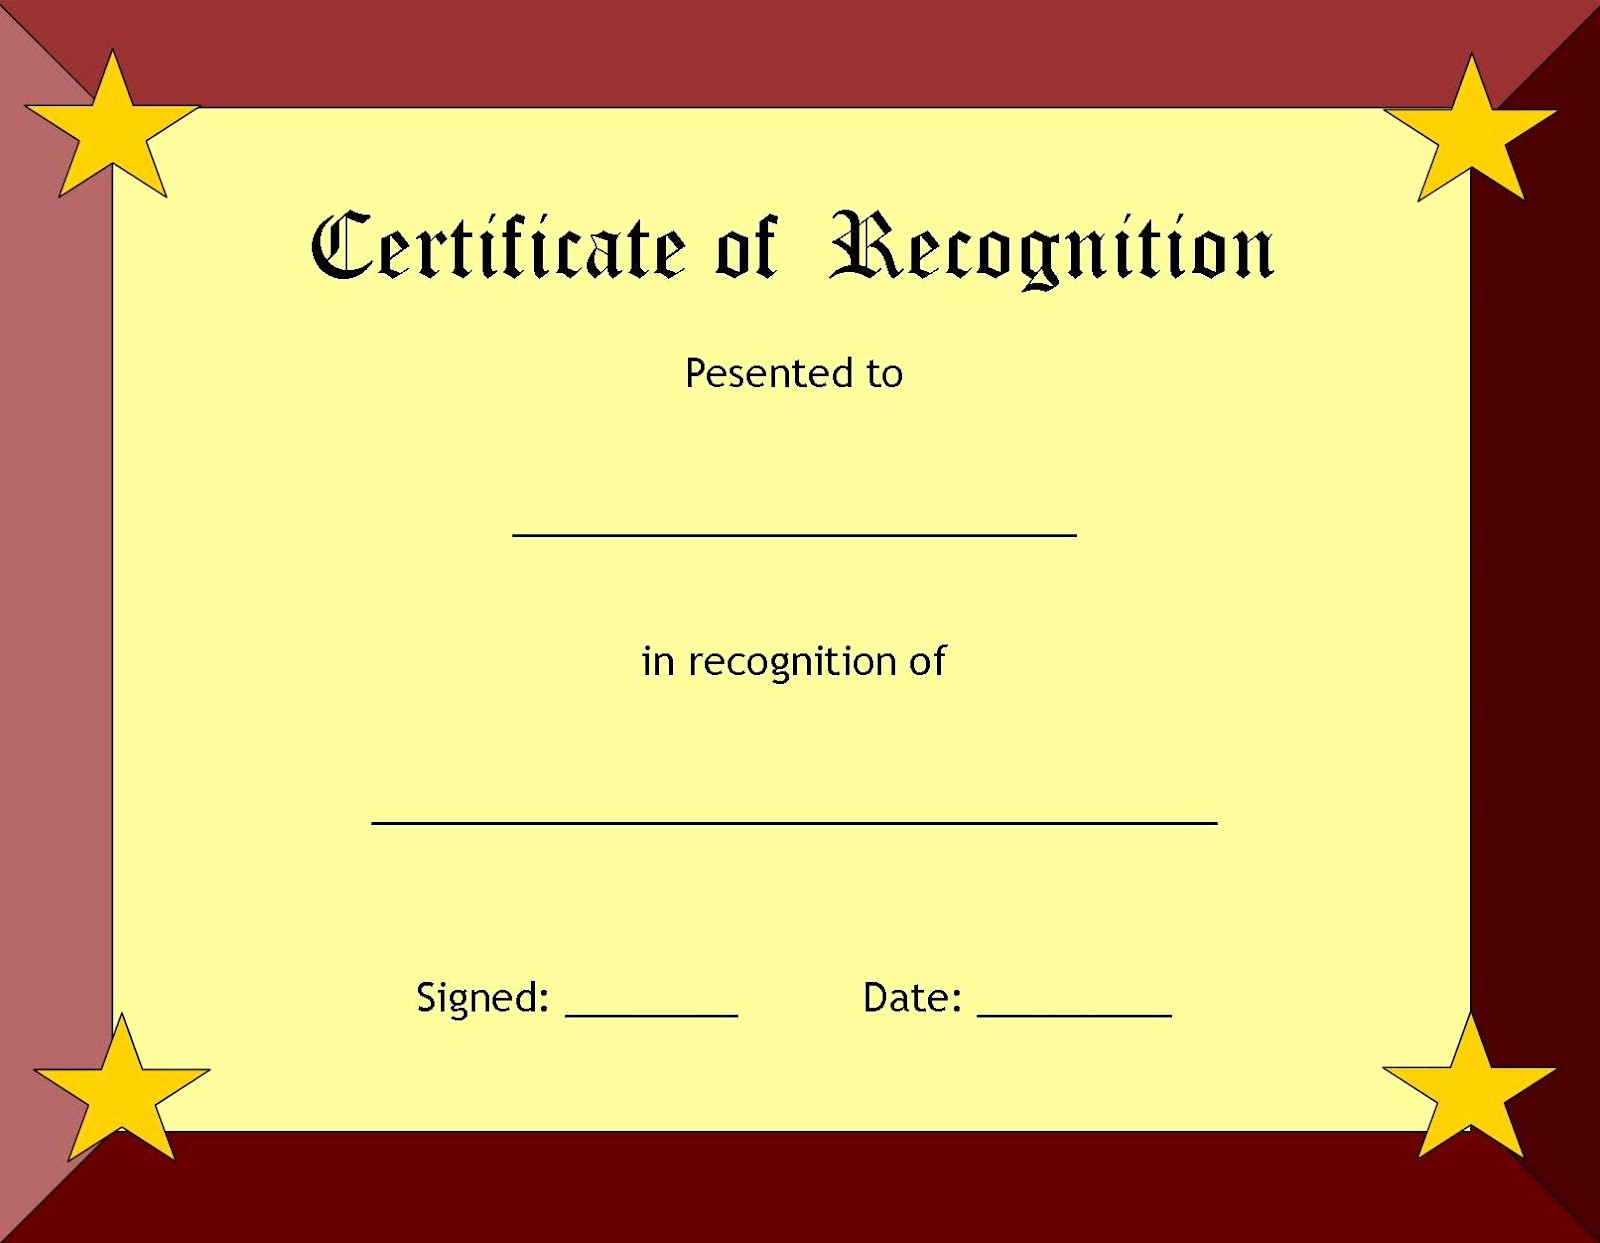 Certificate Of Recognition Template Word Fresh Certificate Templates without Borders